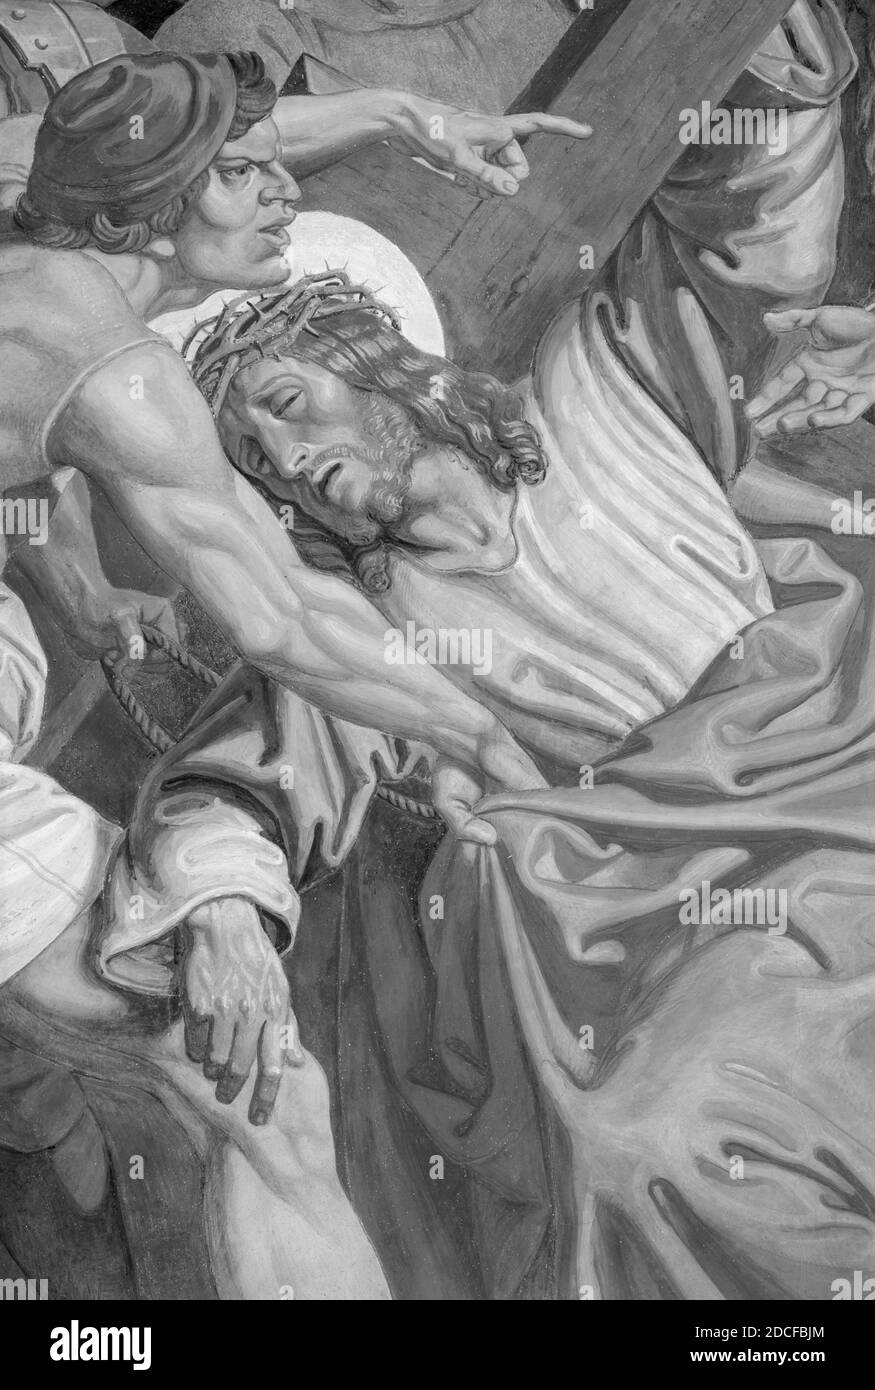 VIENNA, AUSTIRA - OCTOBER 22, 2020: The detail of fresco Fall of Jesus undwer the cross  as part of Cross way station in the church. Stock Photo